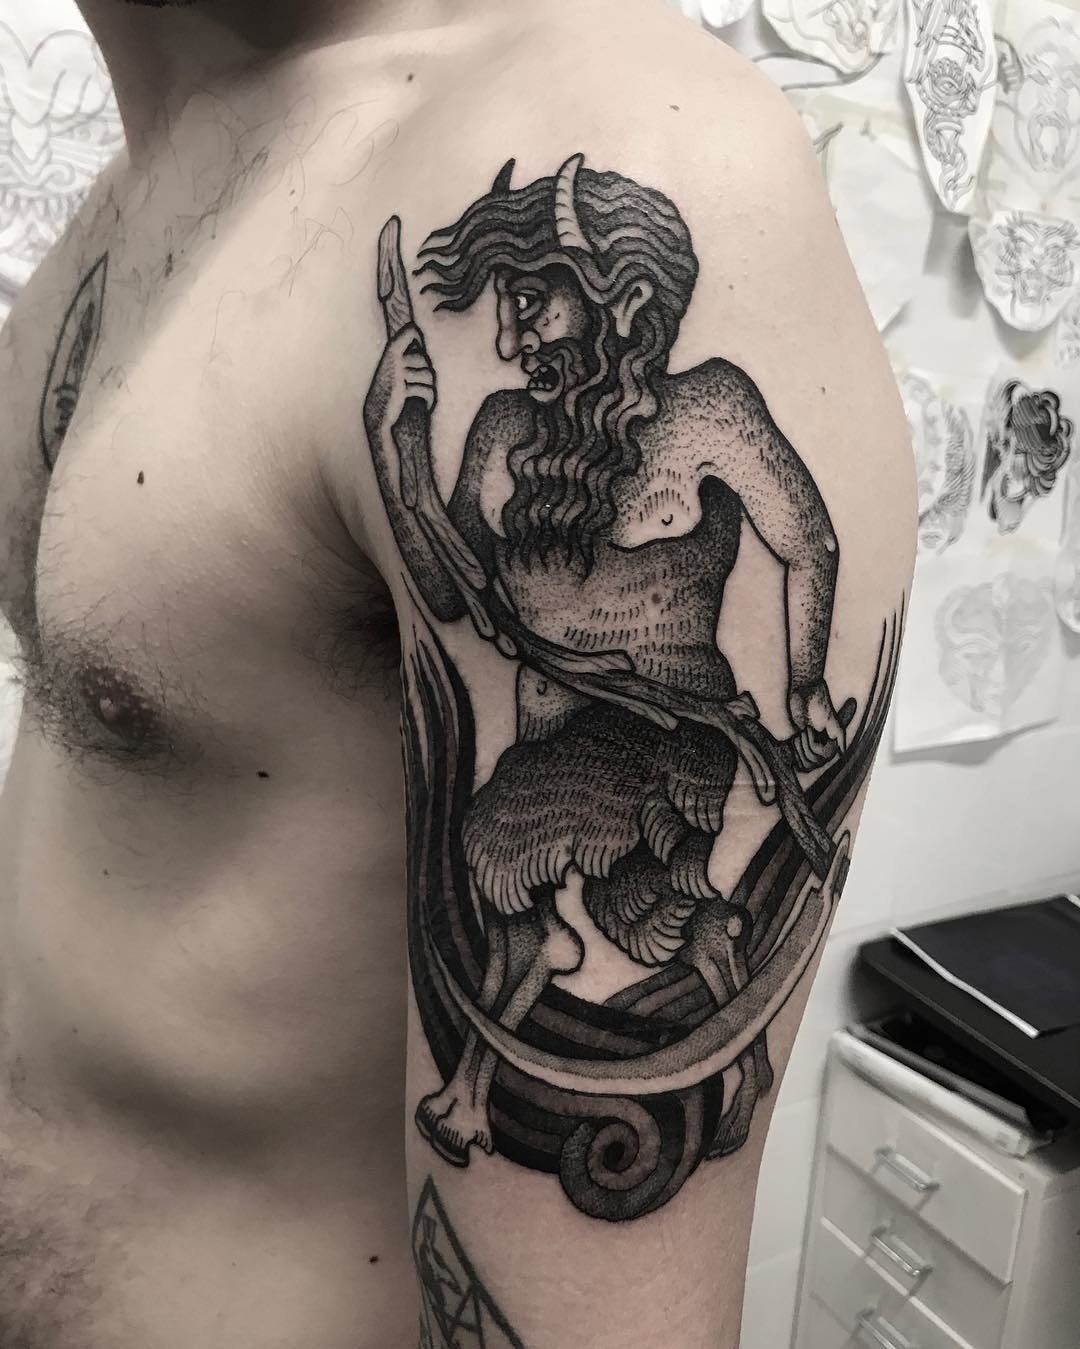 DAMON H TATTOOS on Instagram Progress on a Greek mythology sleeve Im  working on Pegasus and Hercules are healed Zeus is fresh  Done at